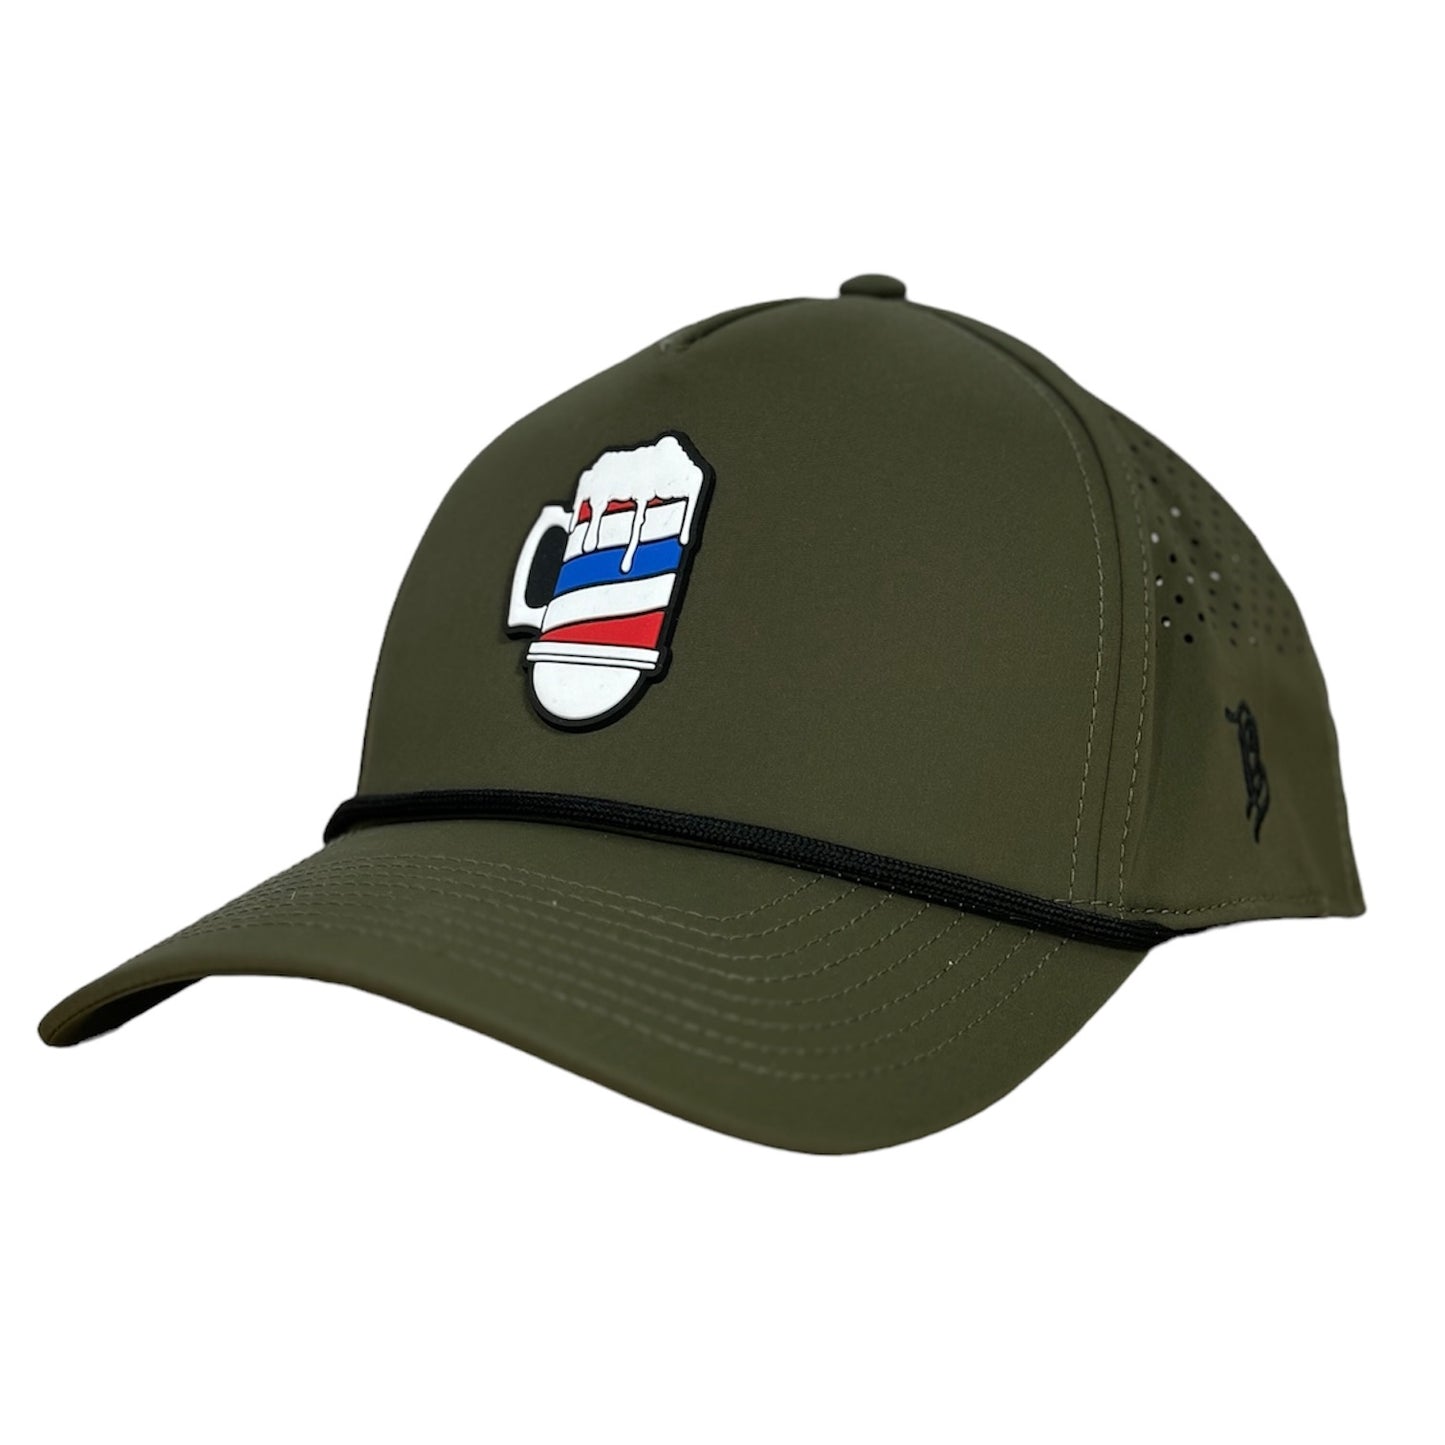 BARBER BEER POLE PVC CURVED 5 PANEL PERFORMANCE GREEN